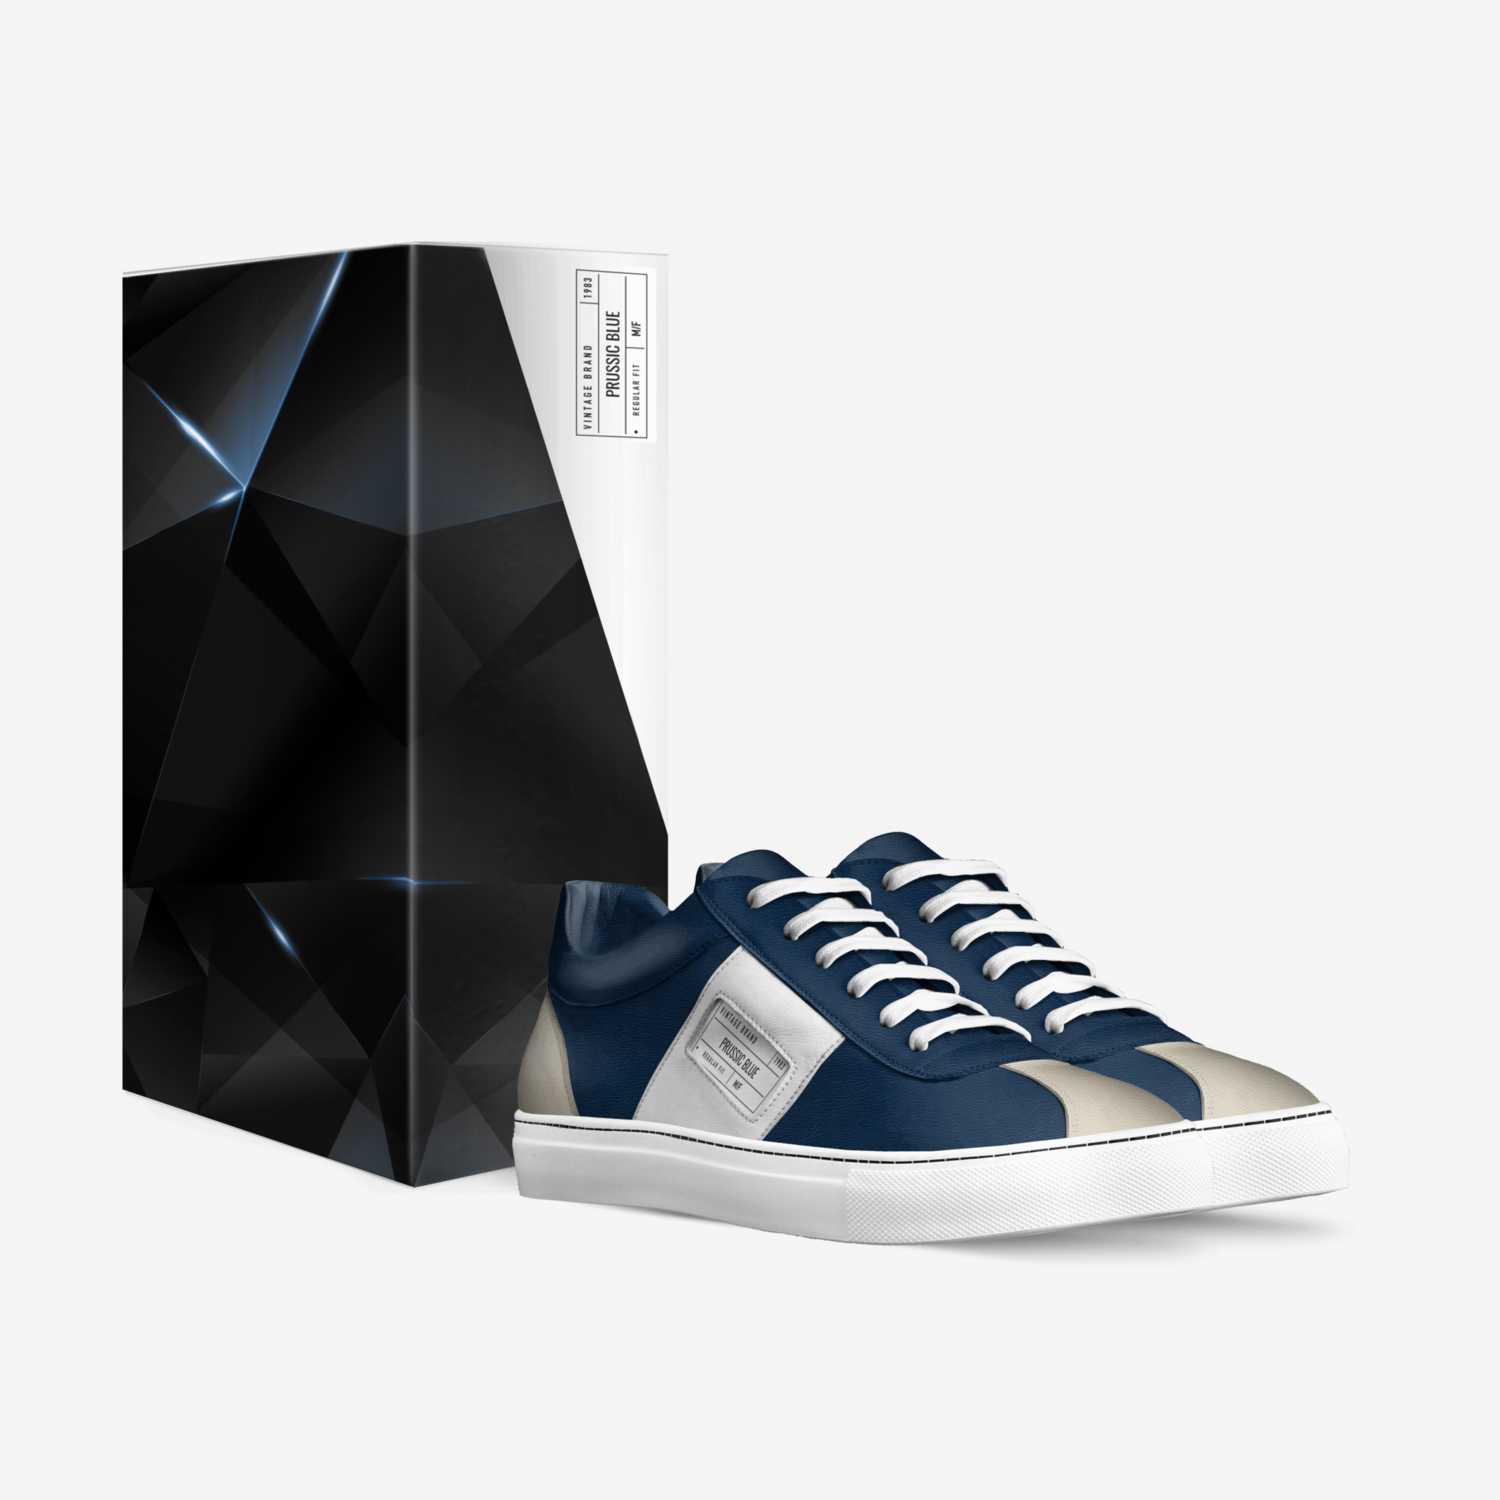 Prussic Blue custom made in Italy shoes by Finn Moran | Box view